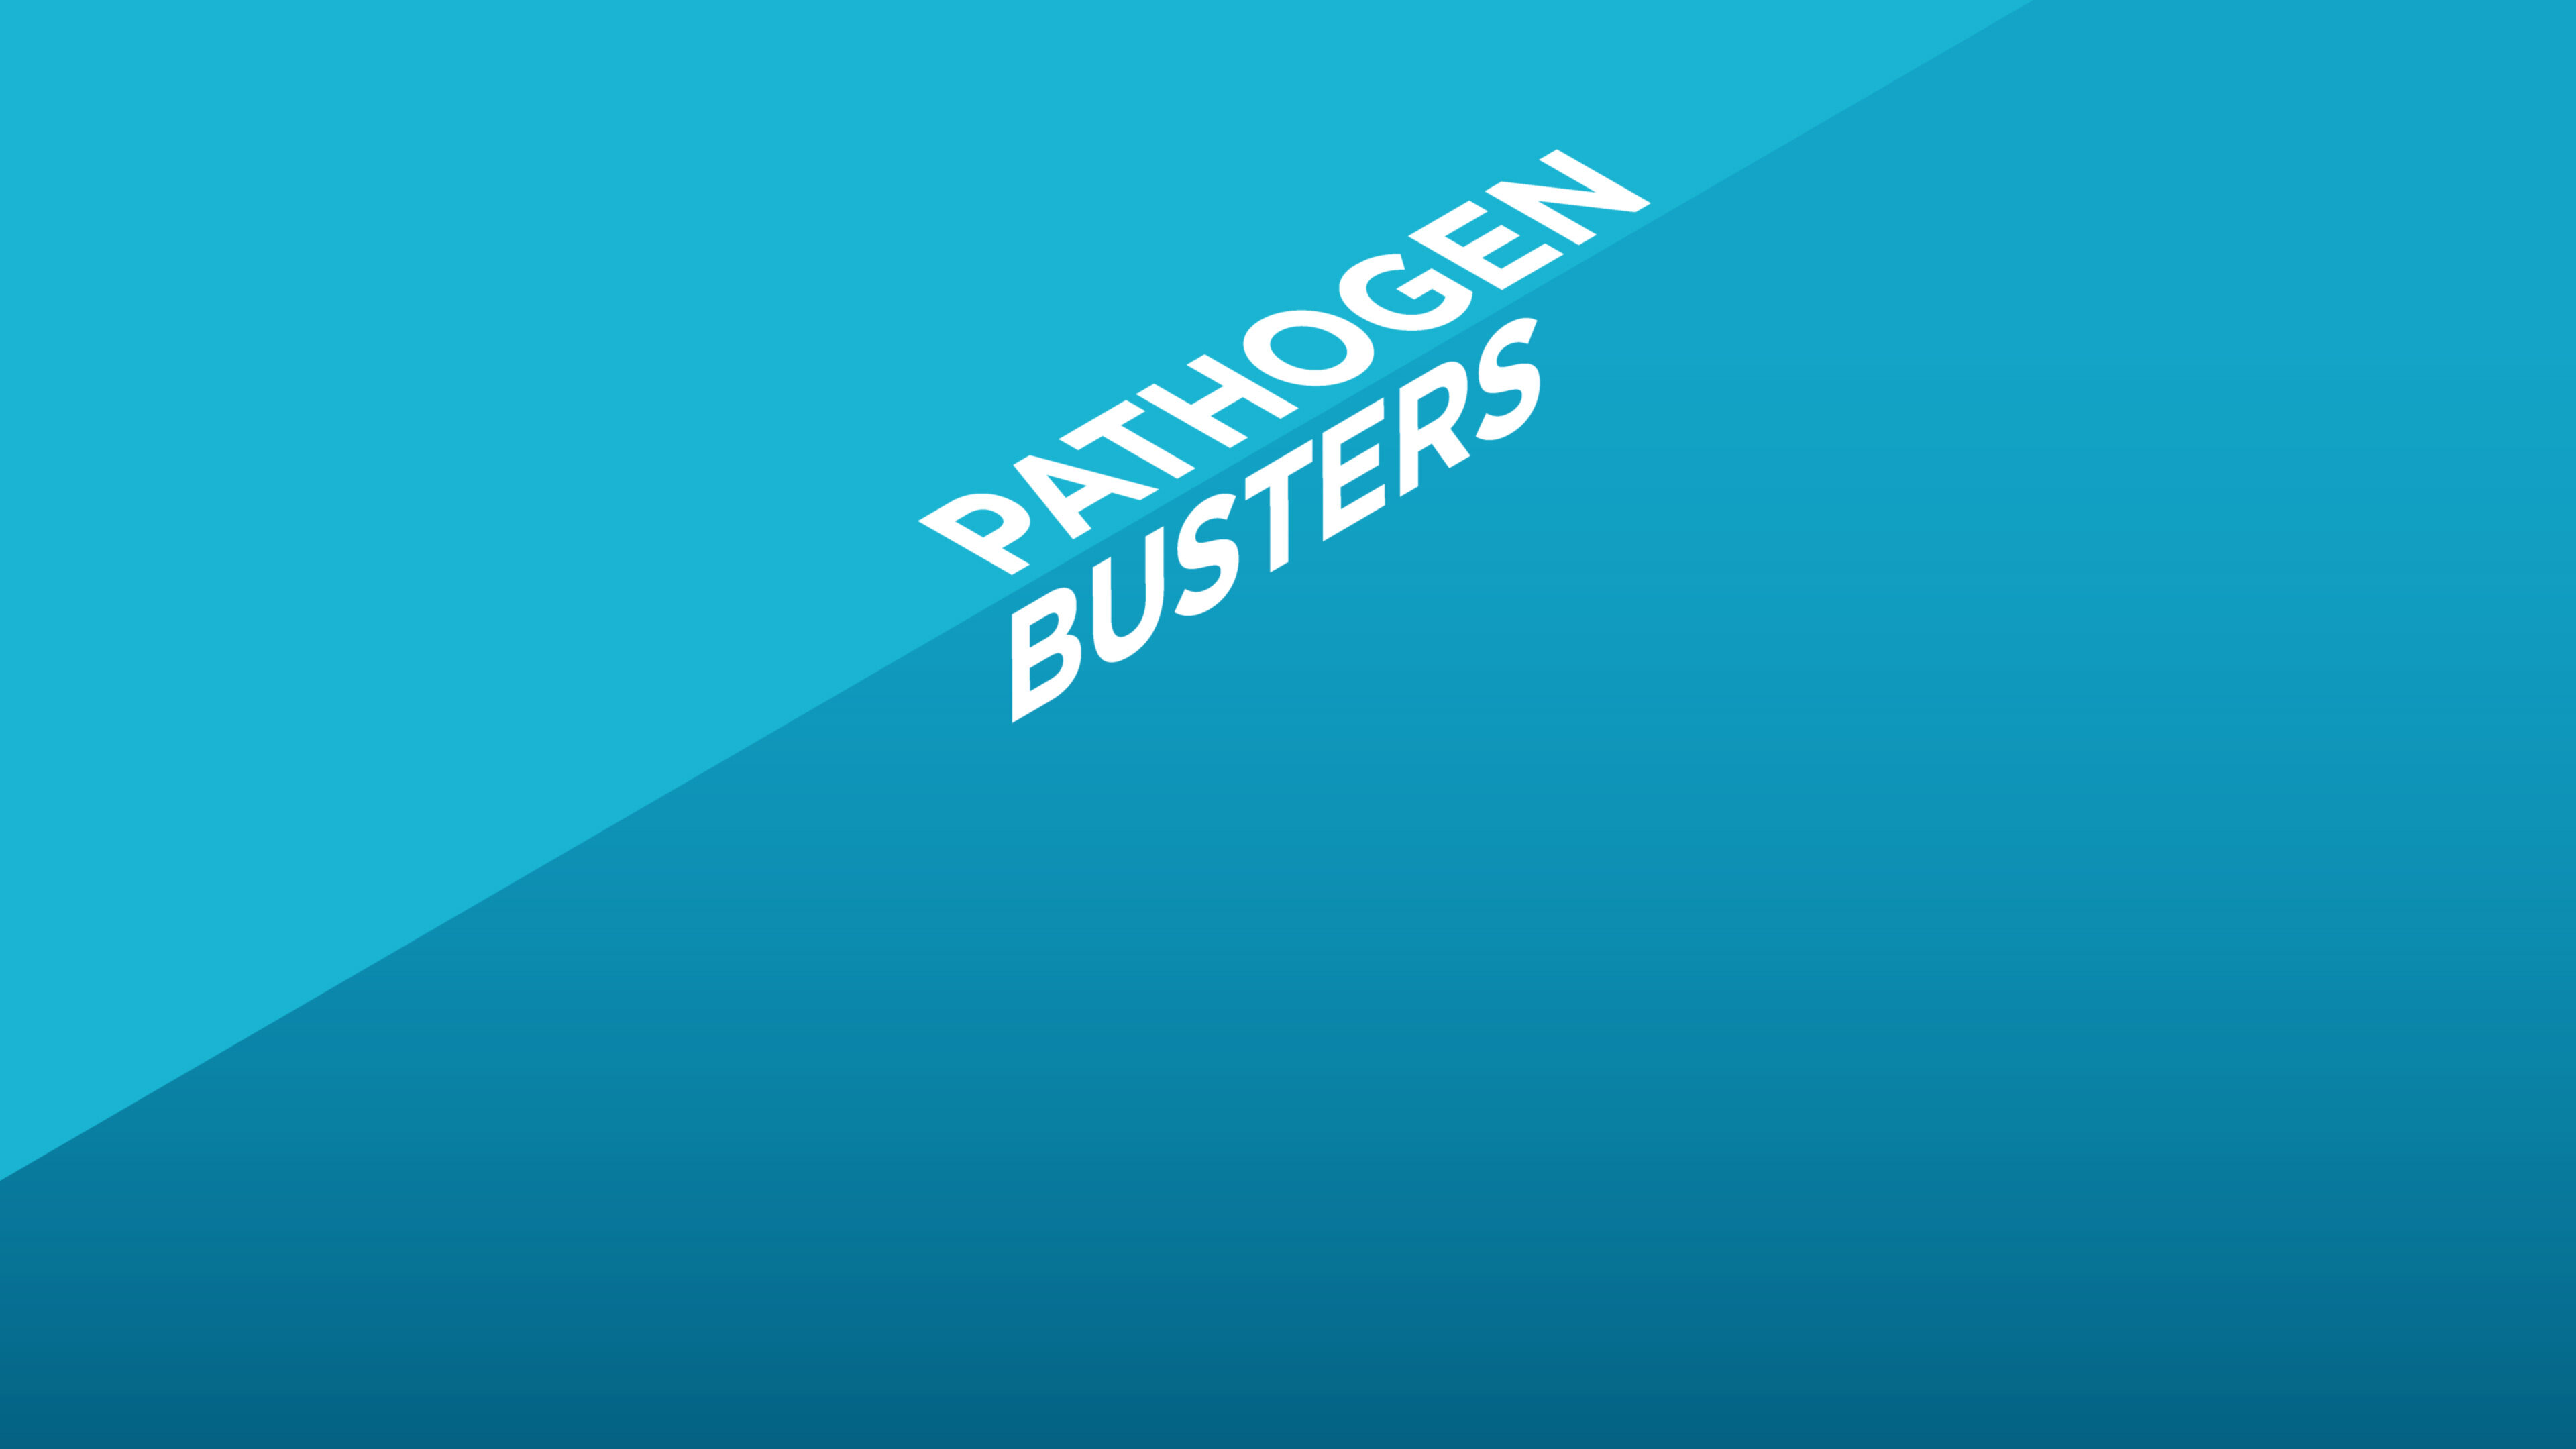 The words "Pathogen Busters" are rendered in uppercase sans serif font and rendered at a dimensional angle as artwork.